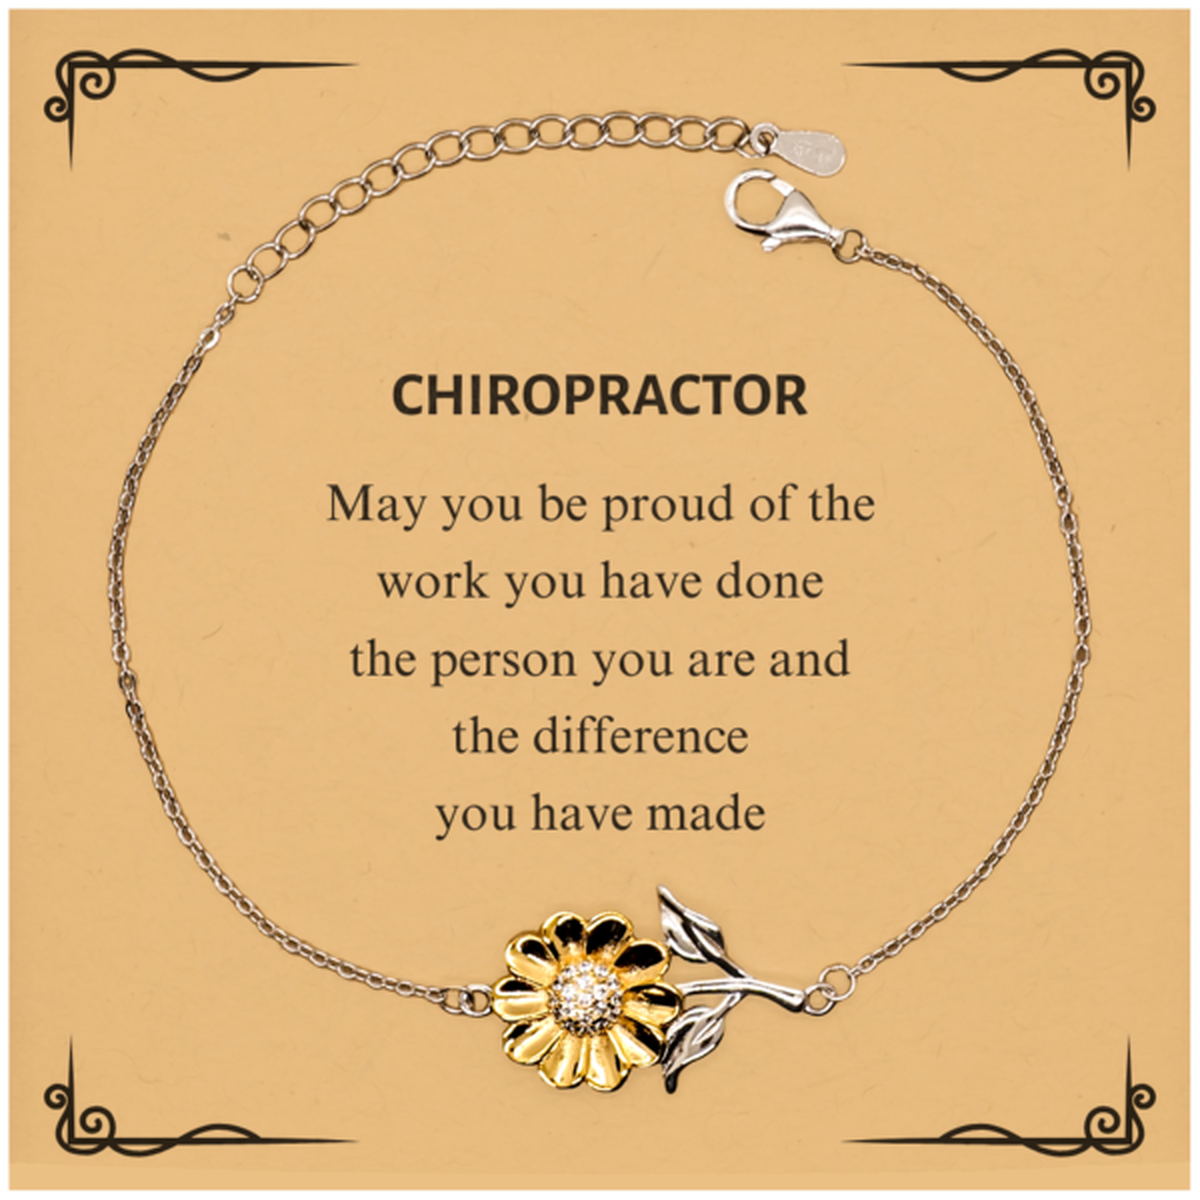 Chiropractor May you be proud of the work you have done, Retirement Chiropractor Sunflower Bracelet for Colleague Appreciation Gifts Amazing for Chiropractor